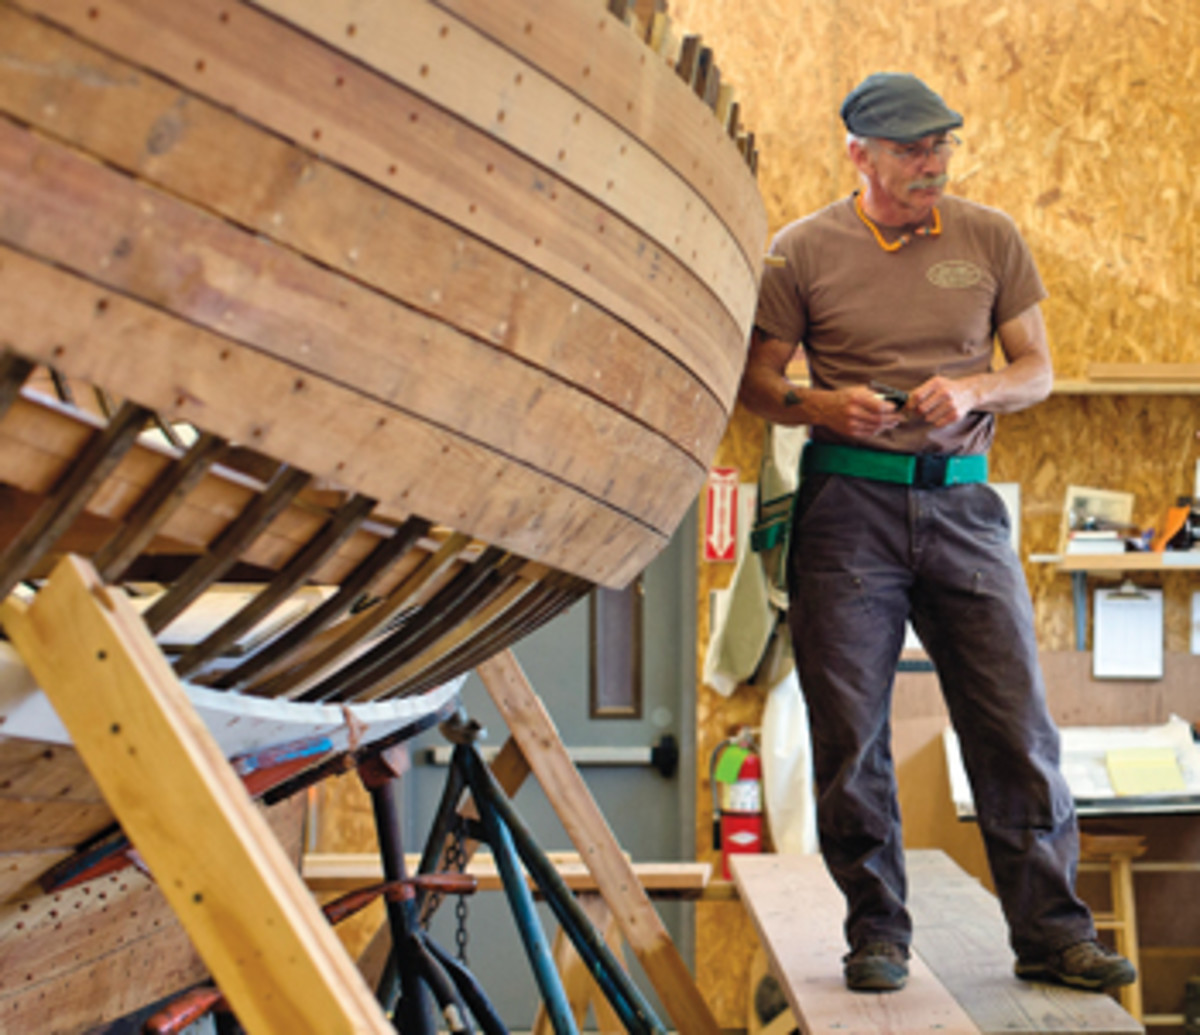 Military veteran Jon Ferguson is reaching out to other vets to share the therapeutic benefits of boats and boatbuilding.